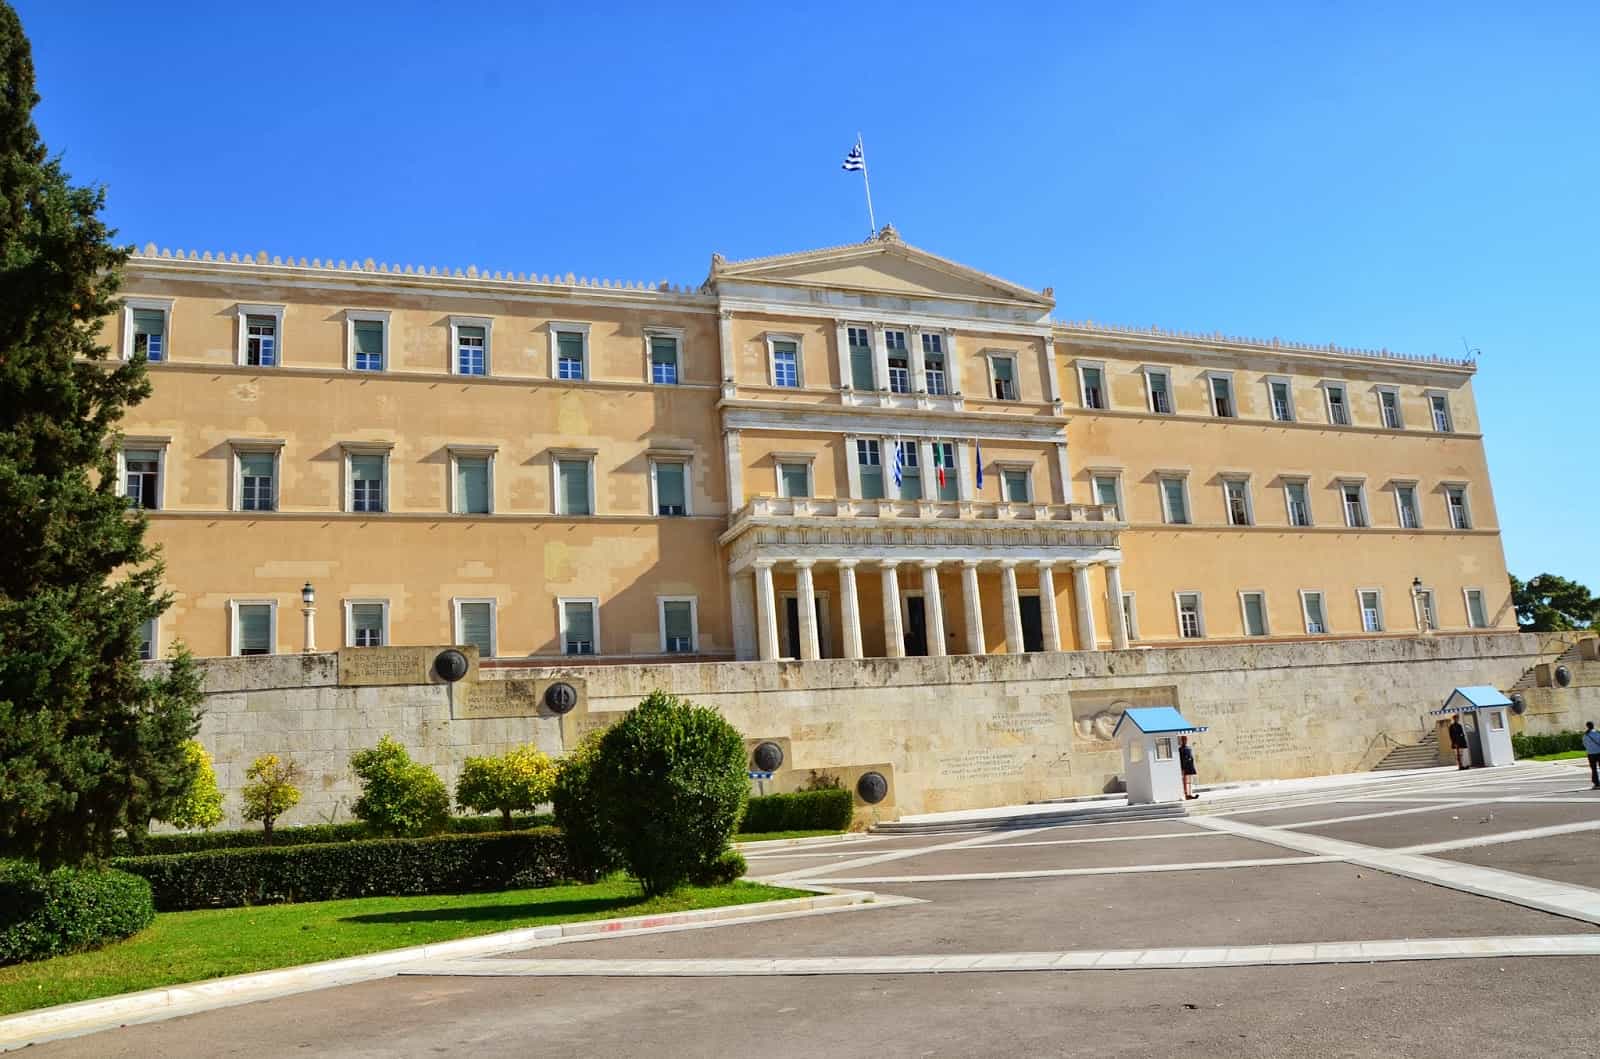 Hellenic Parliament on Syntagma Square in Athens, Greece